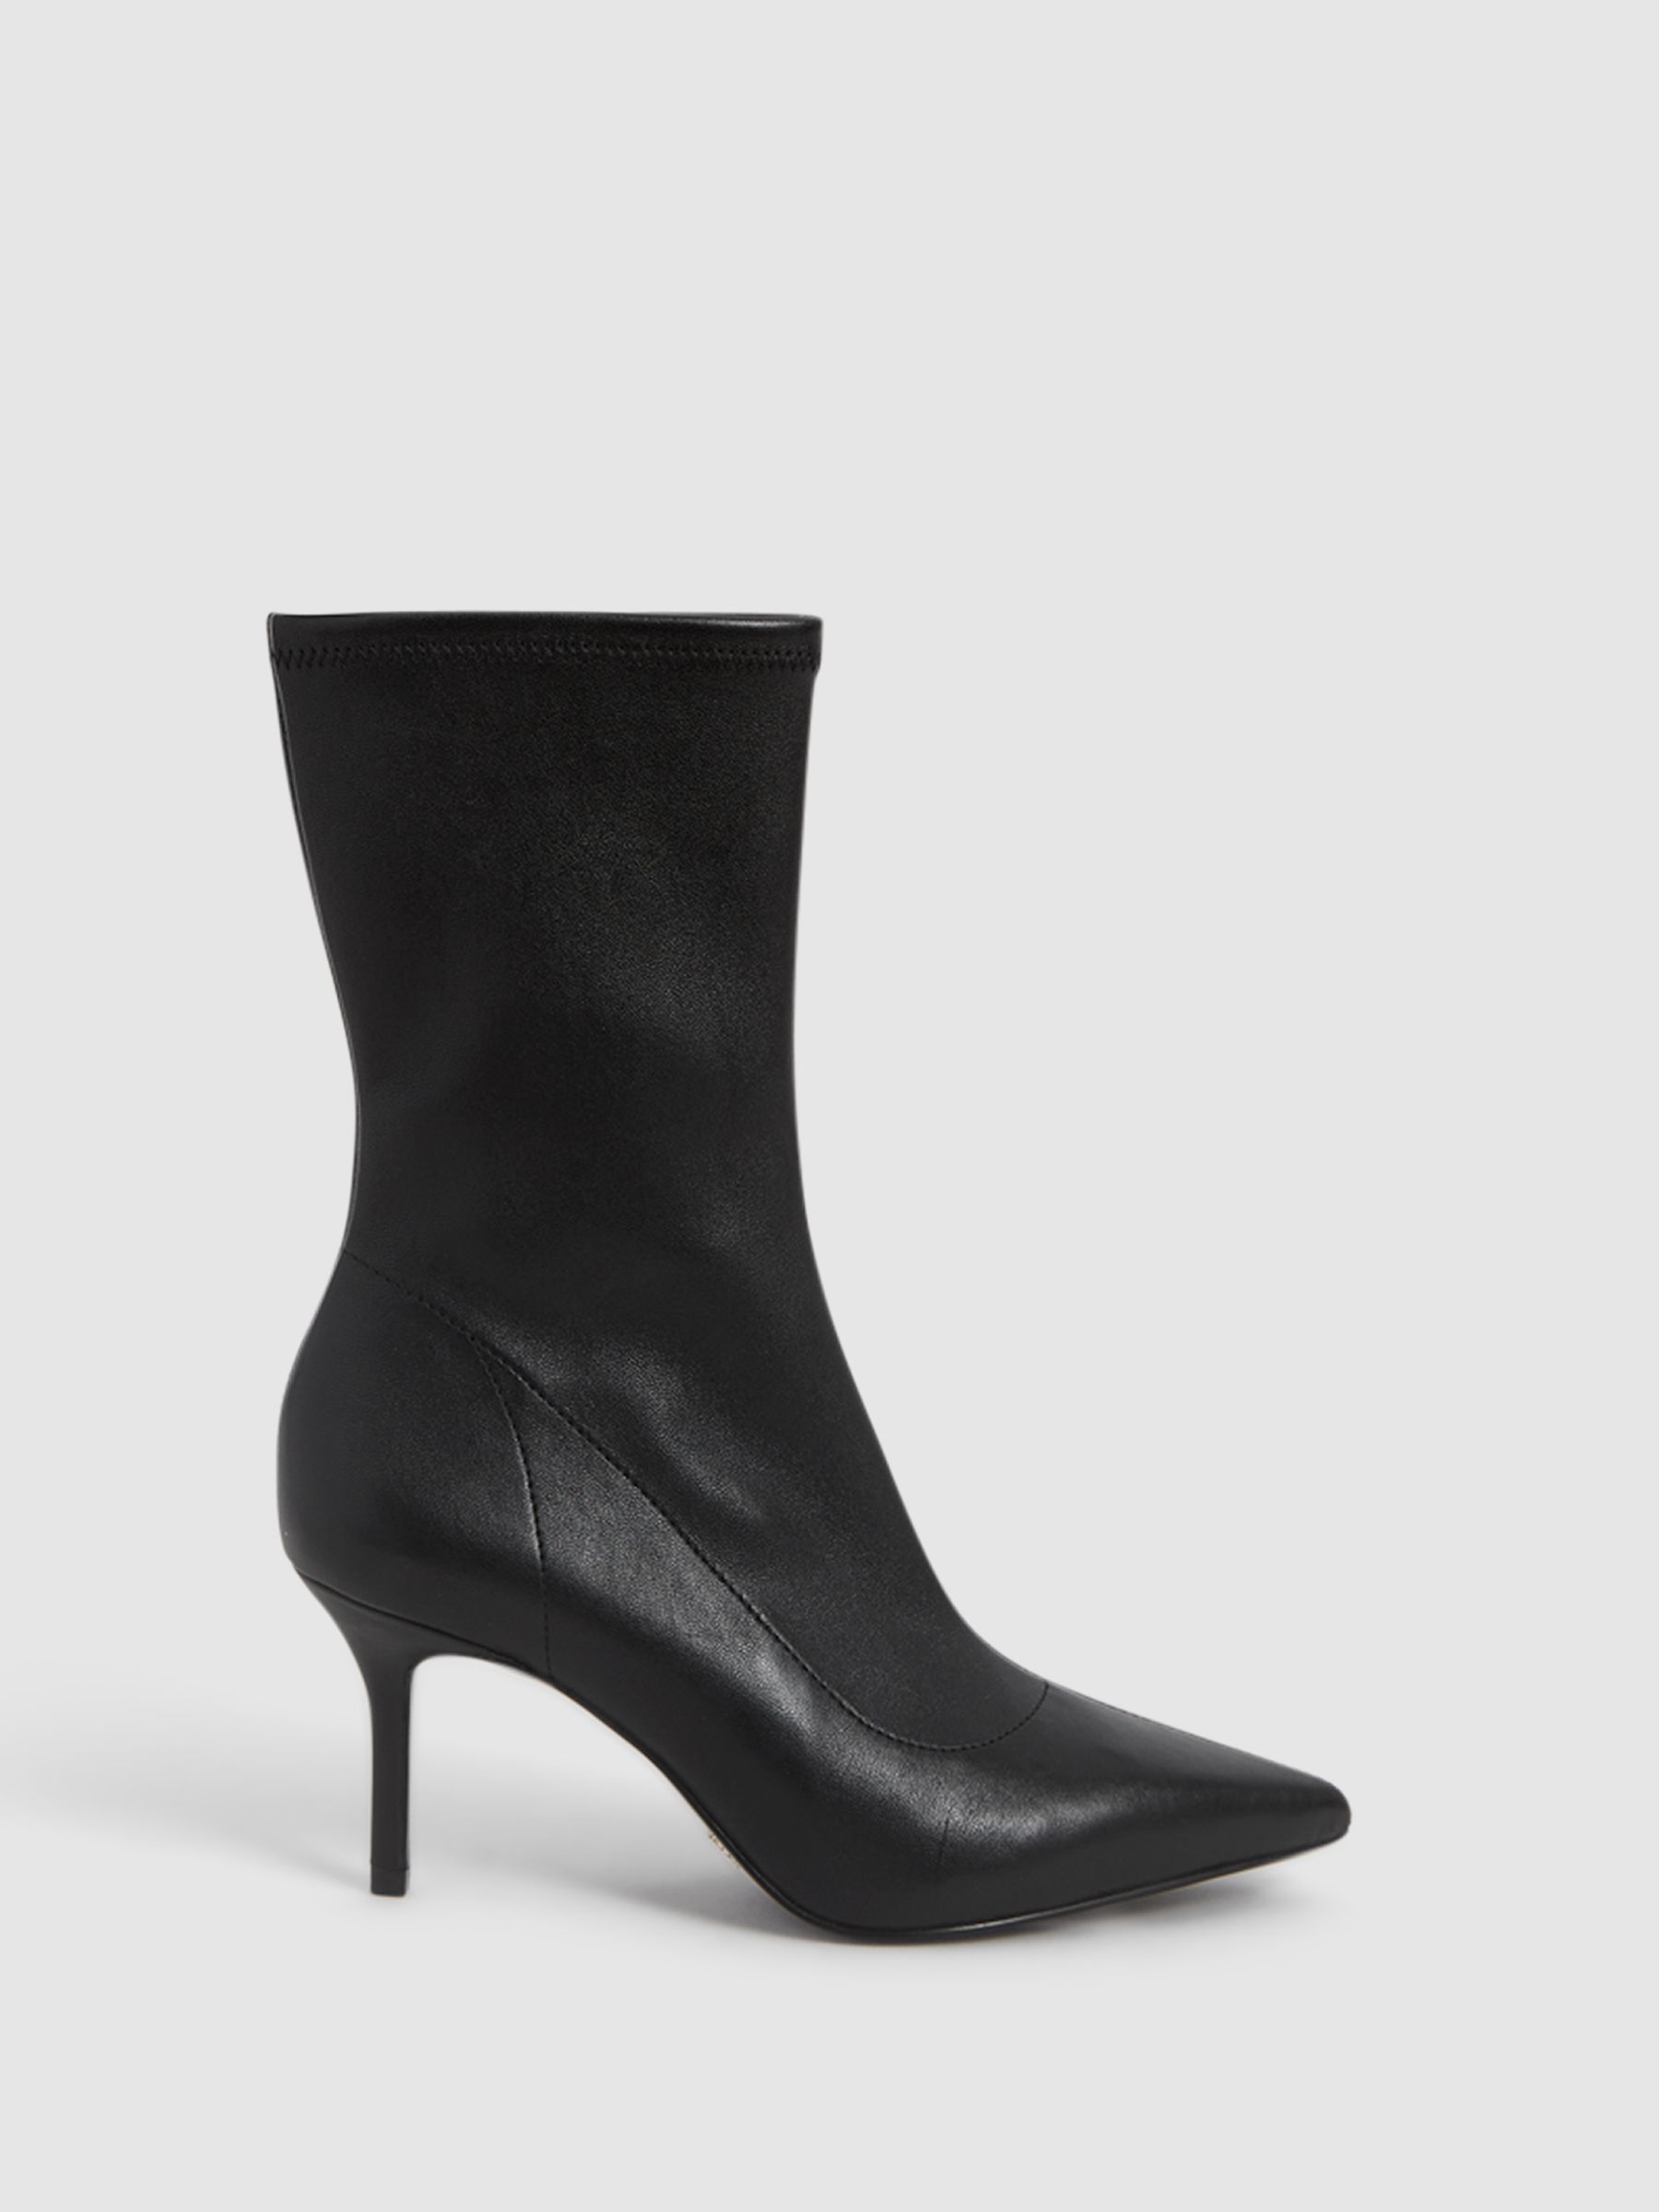 Reiss Caley Pointed Kitten Heel Leather Boots - REISS